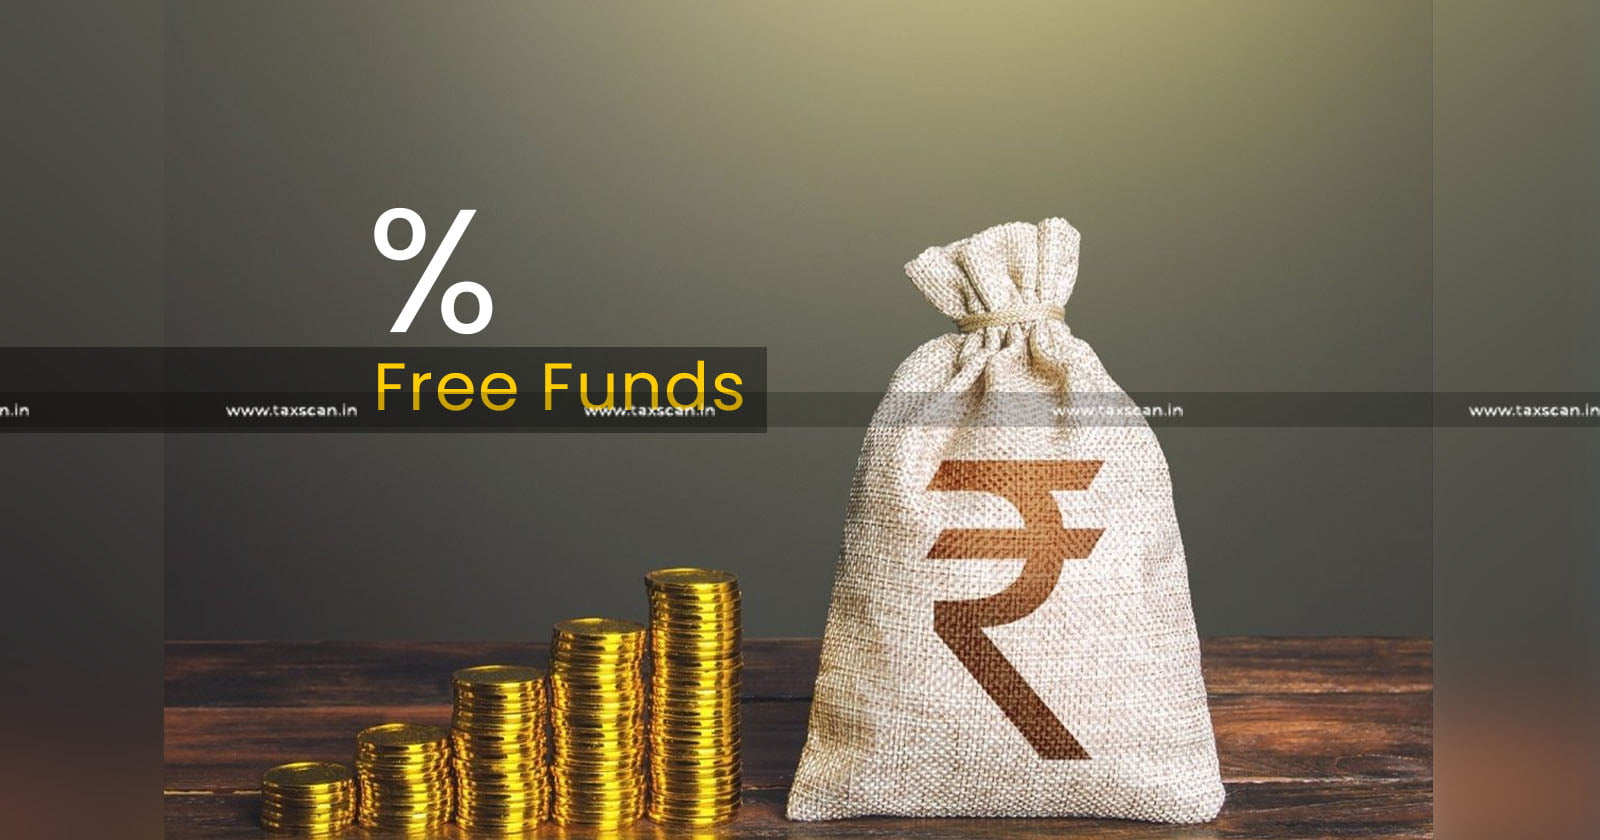 Interest-Free Funds advanced to - Sister Concern for Purchase of Land are Revenue in Nature - ITAT - TAXSCAN